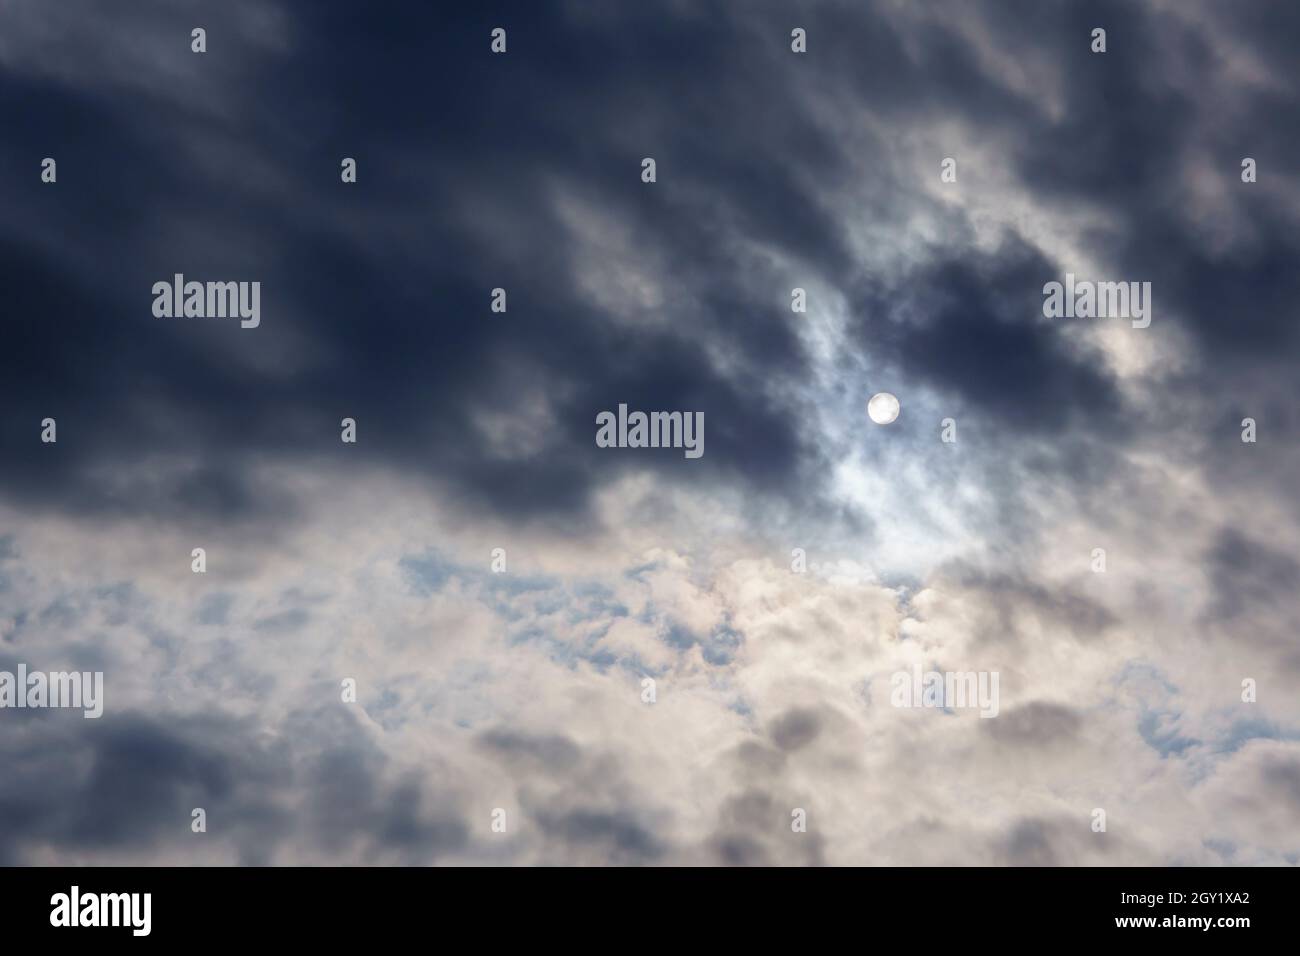 Cloudy weather, the sun through the clouds, gloomy depressive background Stock Photo